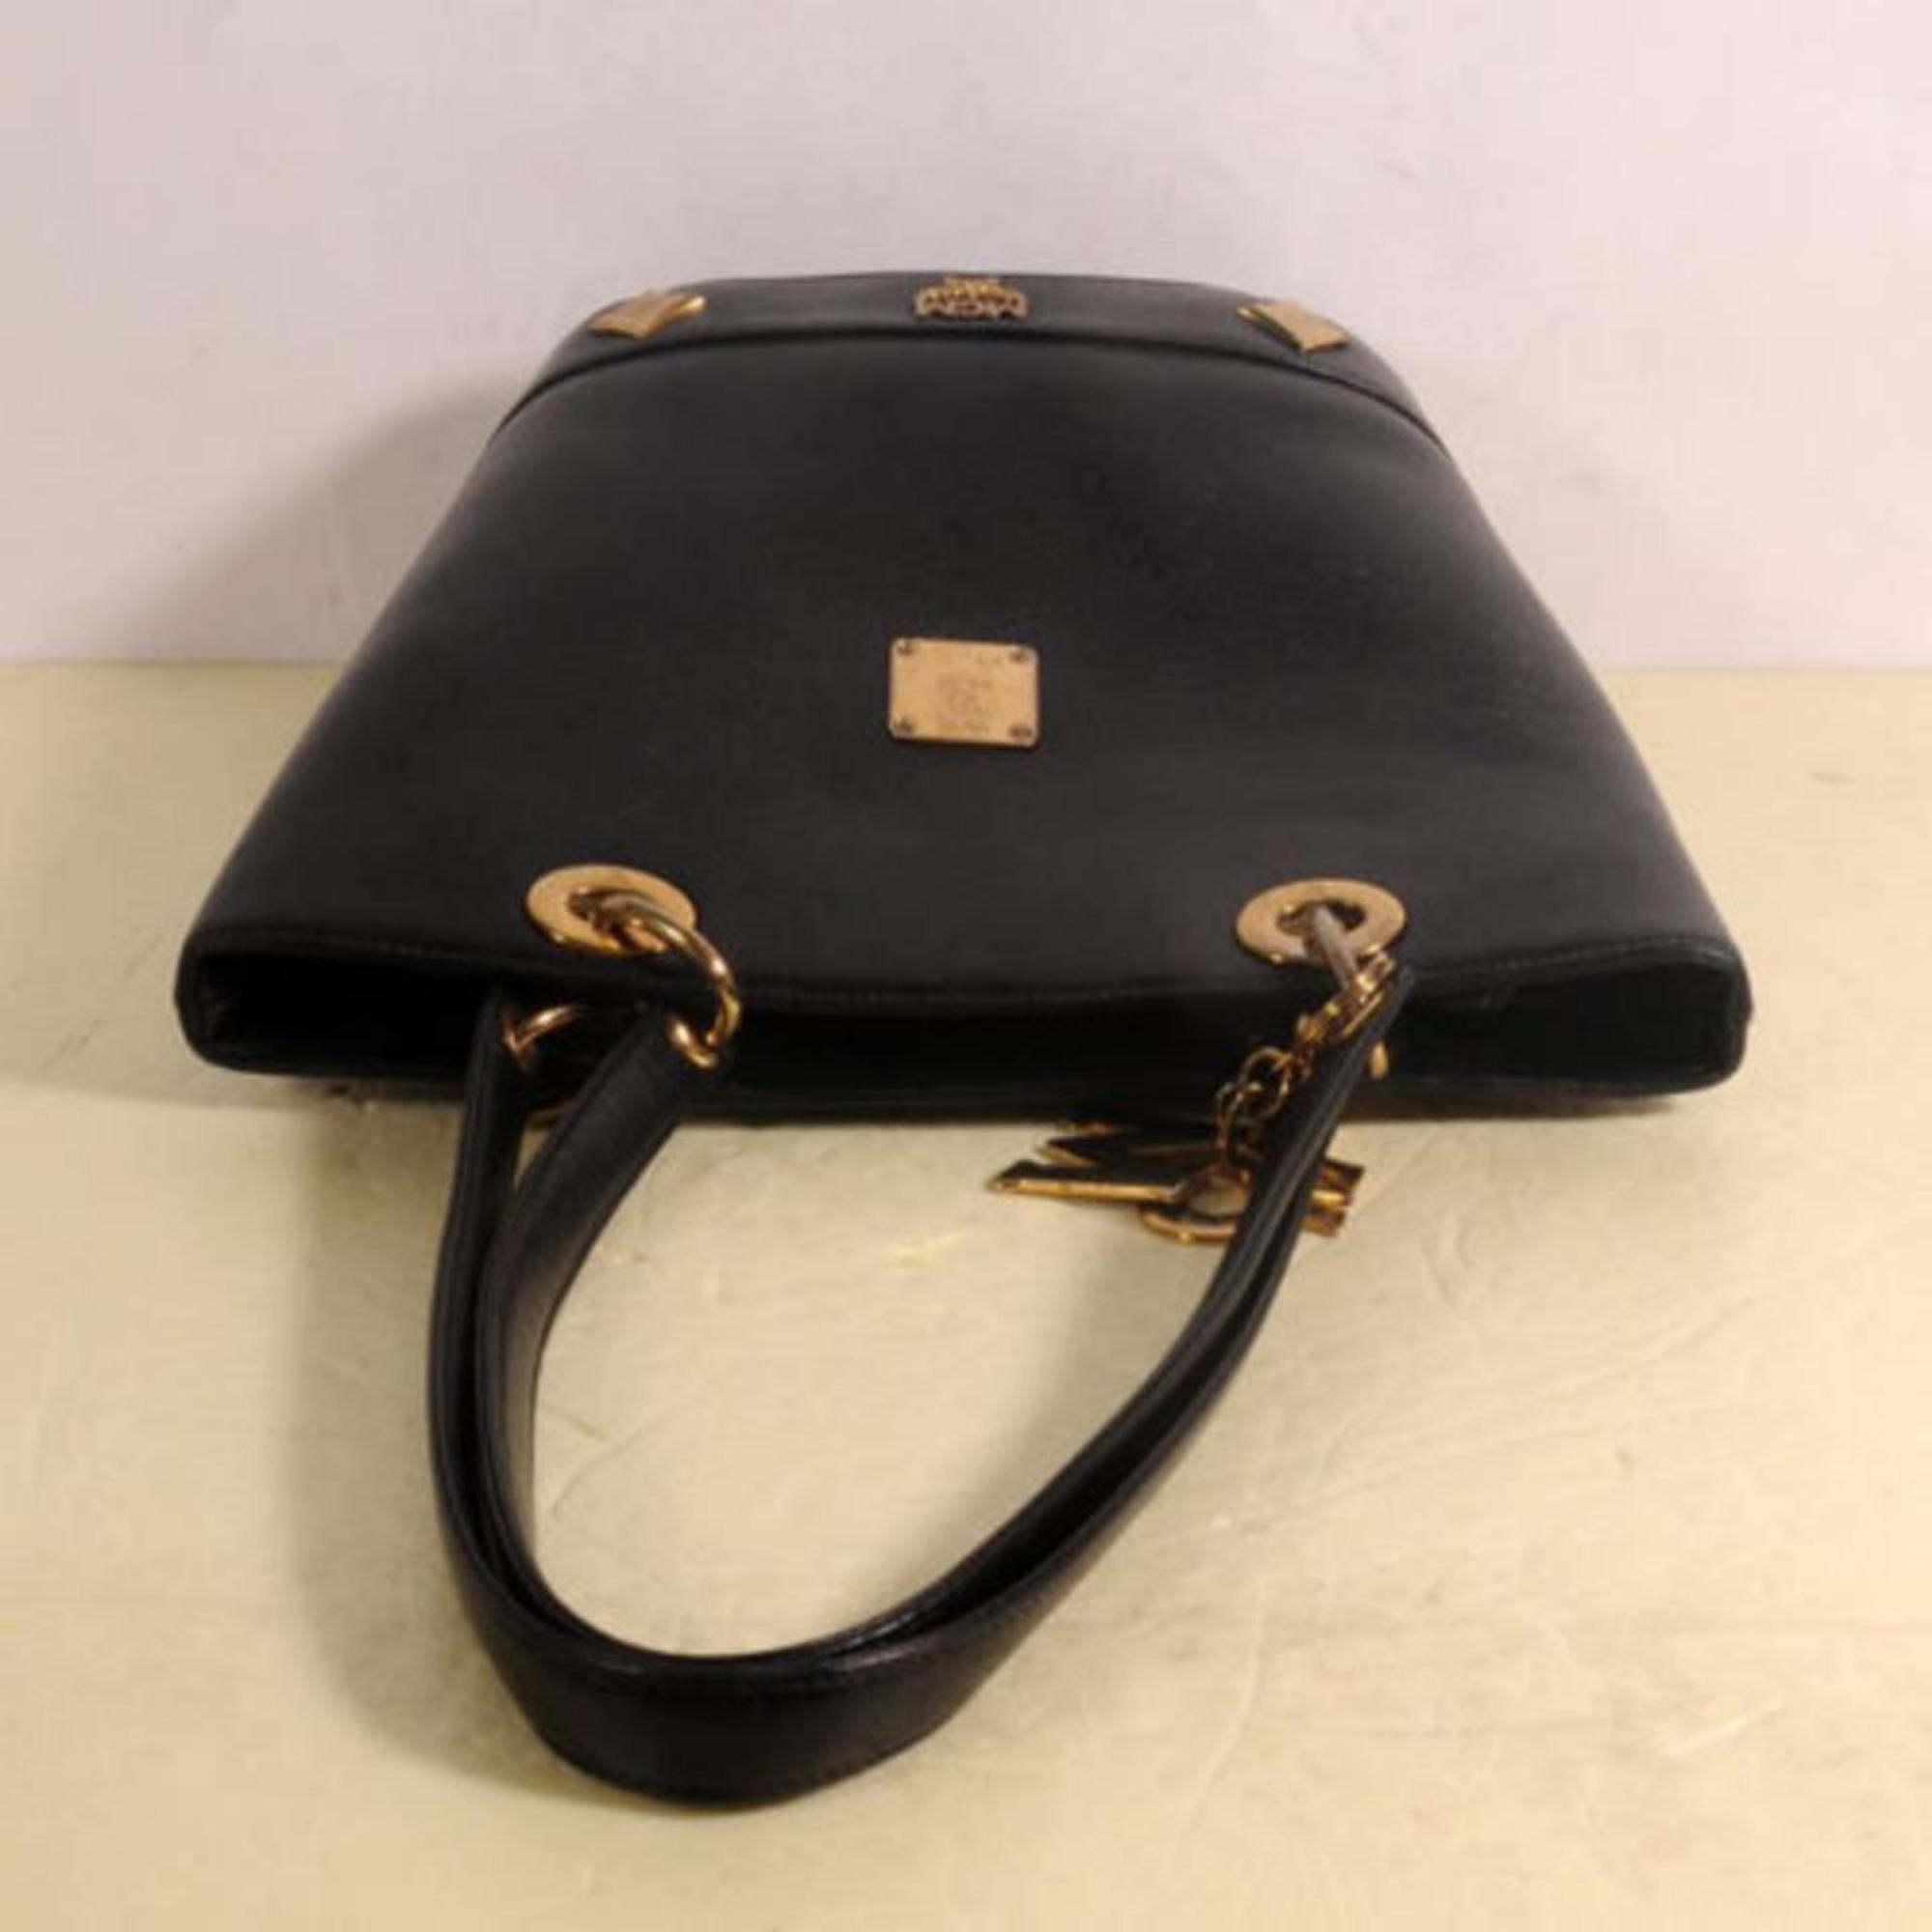 VERY GOOD VINTAGE CONDITION
(7.5/10 or B+)
Includes Dust Bag and Bag Charm
This item does not come with any extra accessories.
Please review photos for more details.
Color appearance may vary depending on your monitor settings.
sku : 869443